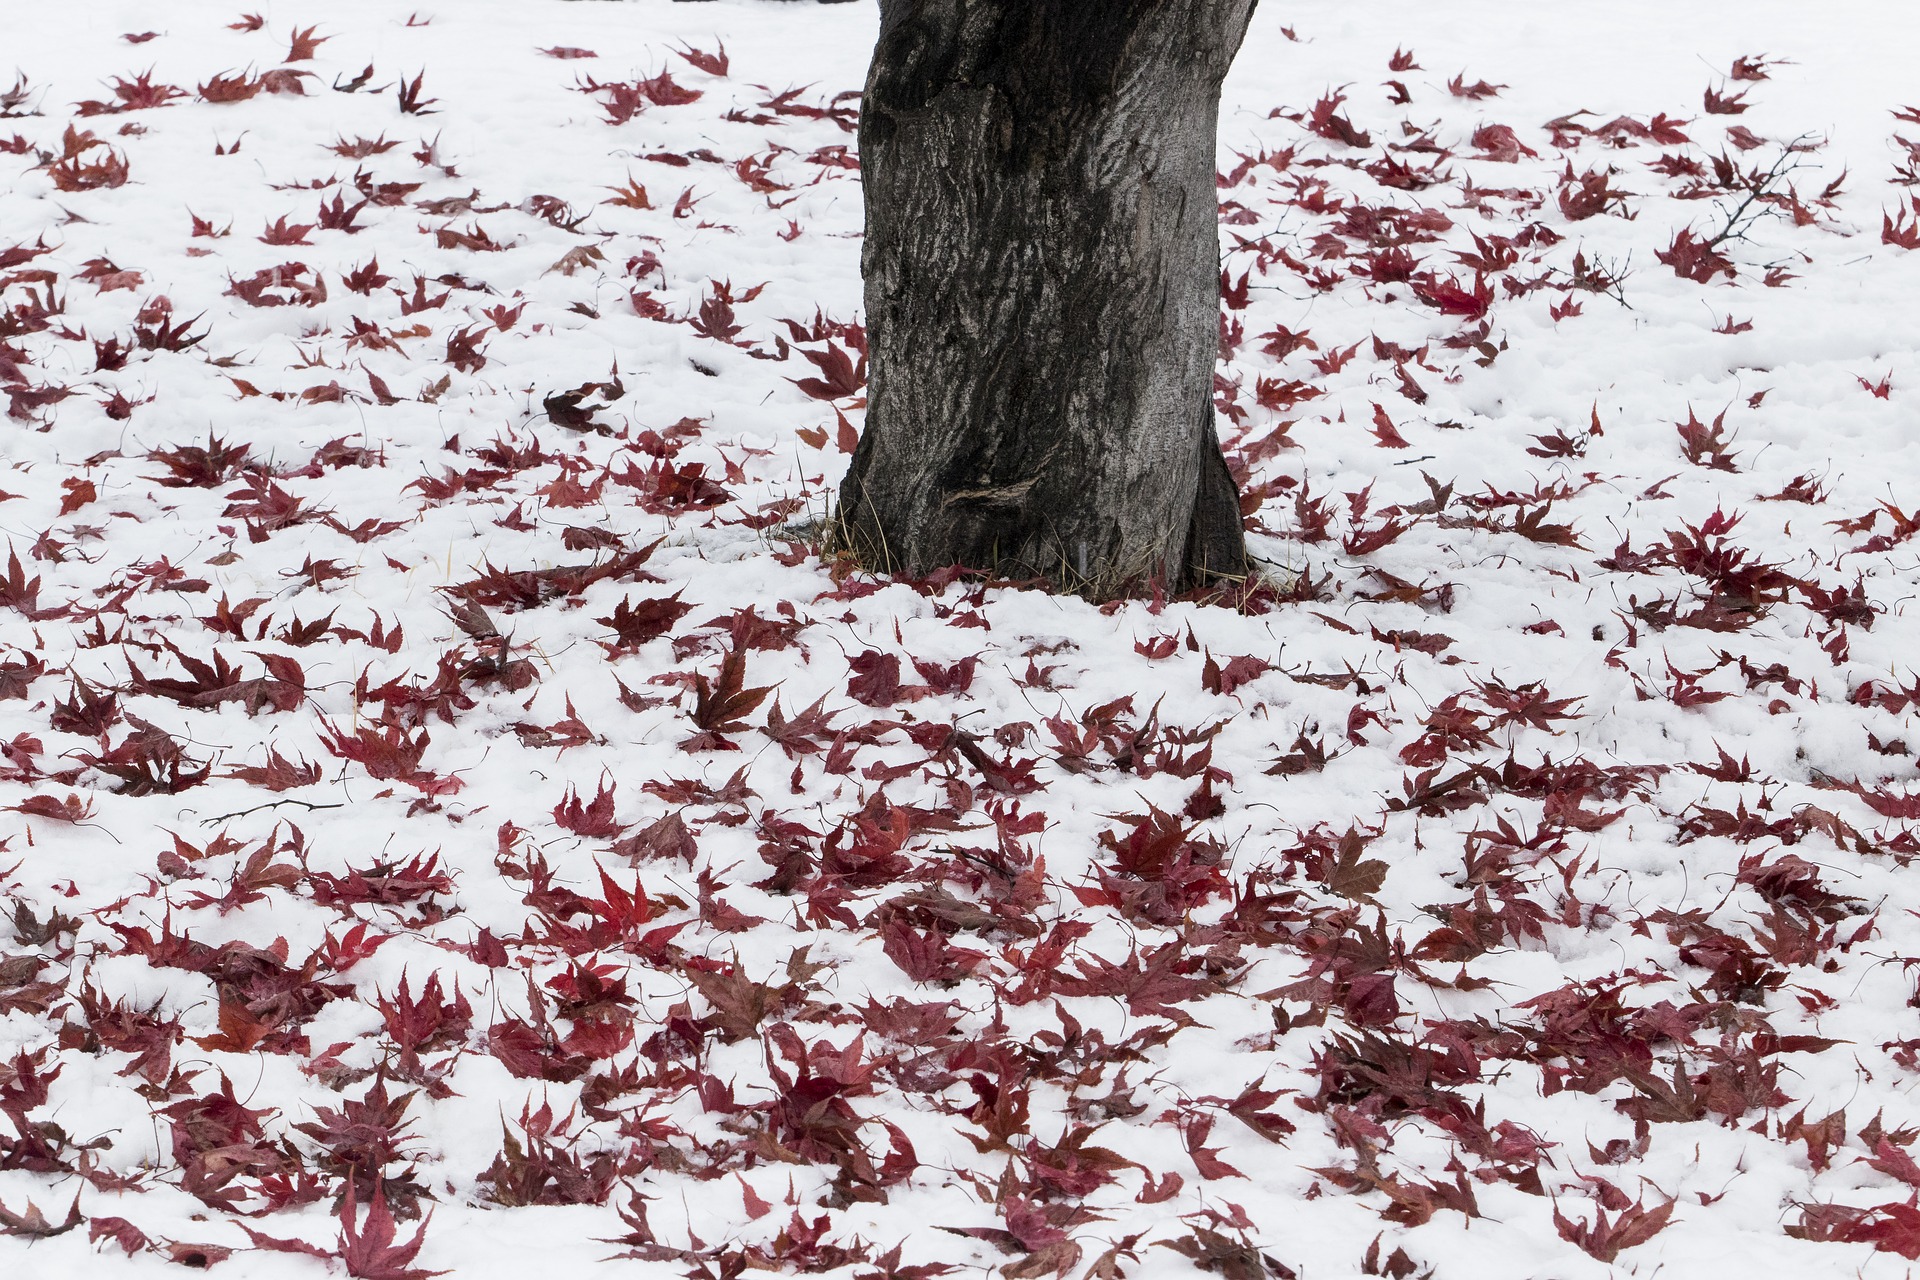 Fall leaves partially covered in snow.